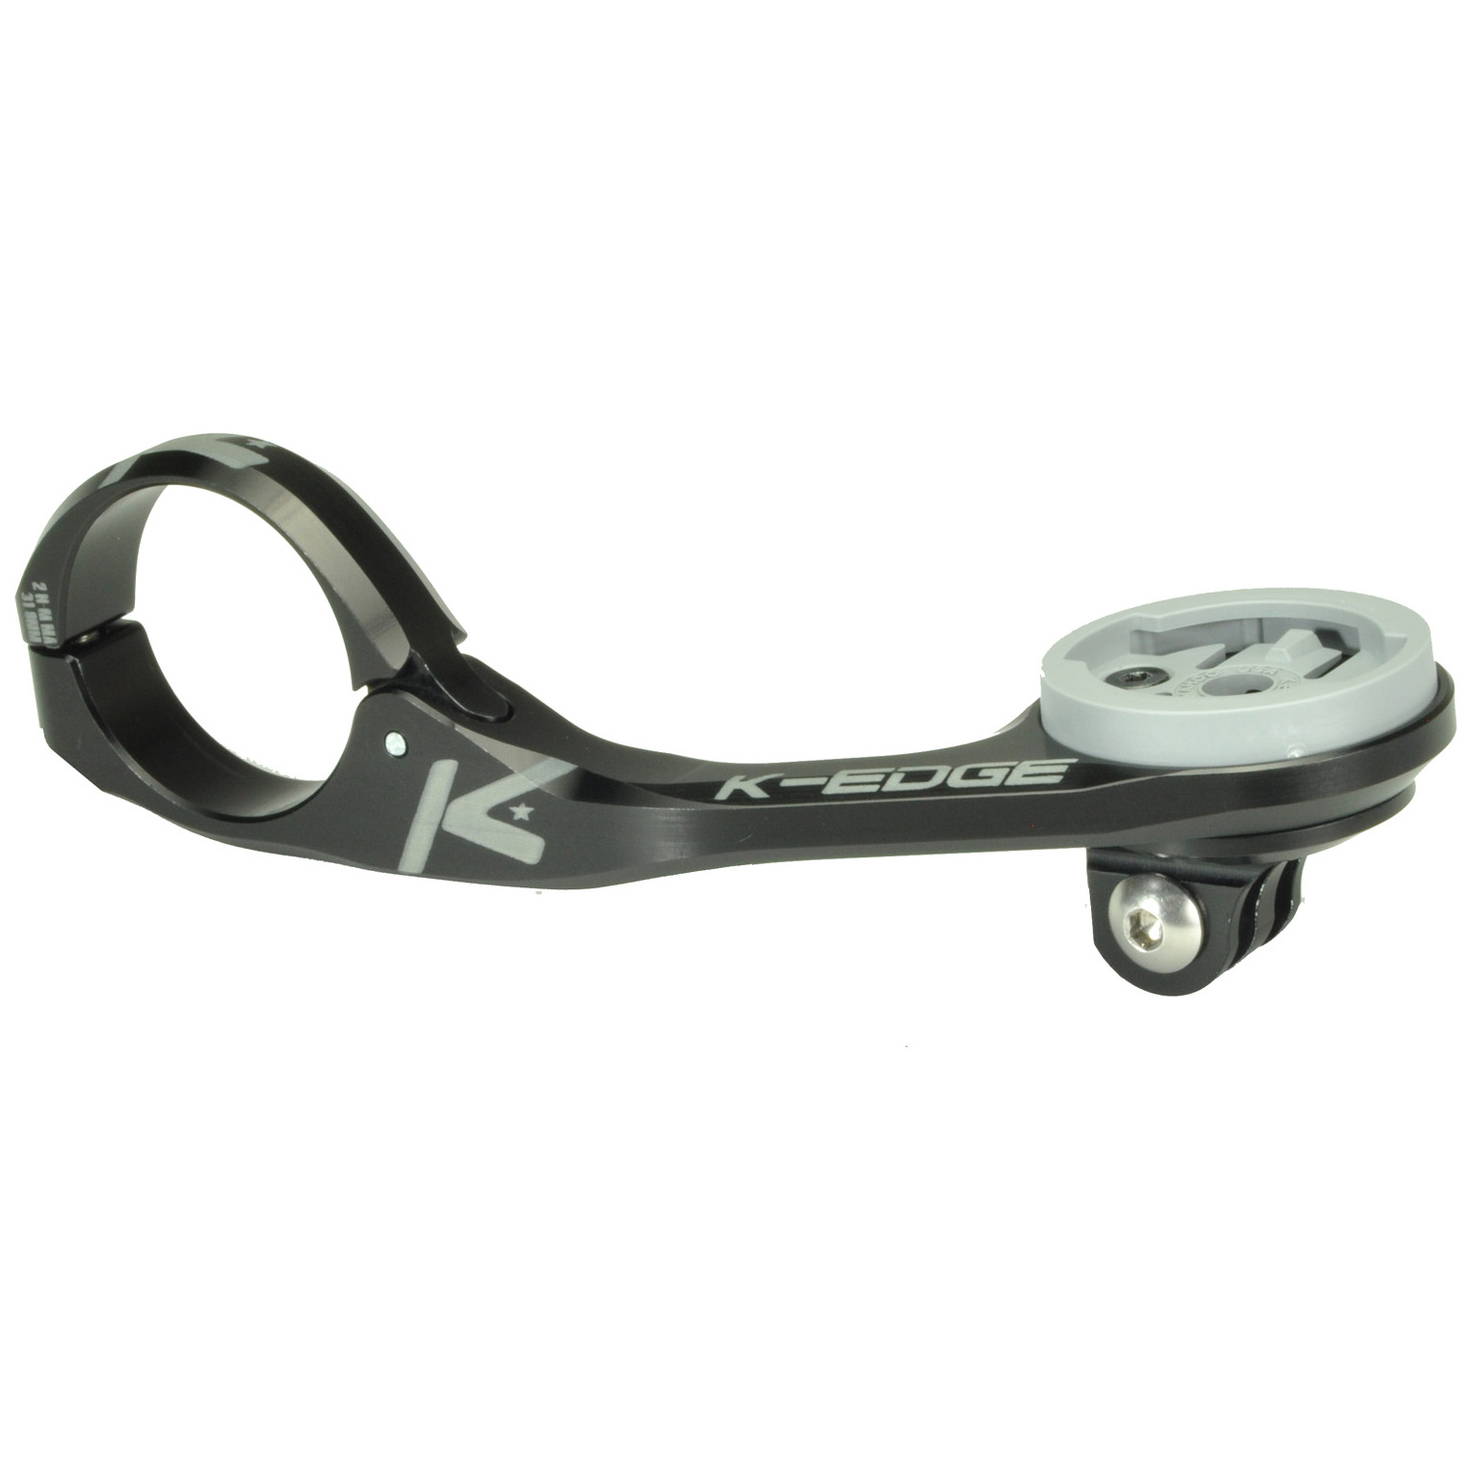 Picture of K-Edge Wahoo MAX Combo Mount - 31.8mm